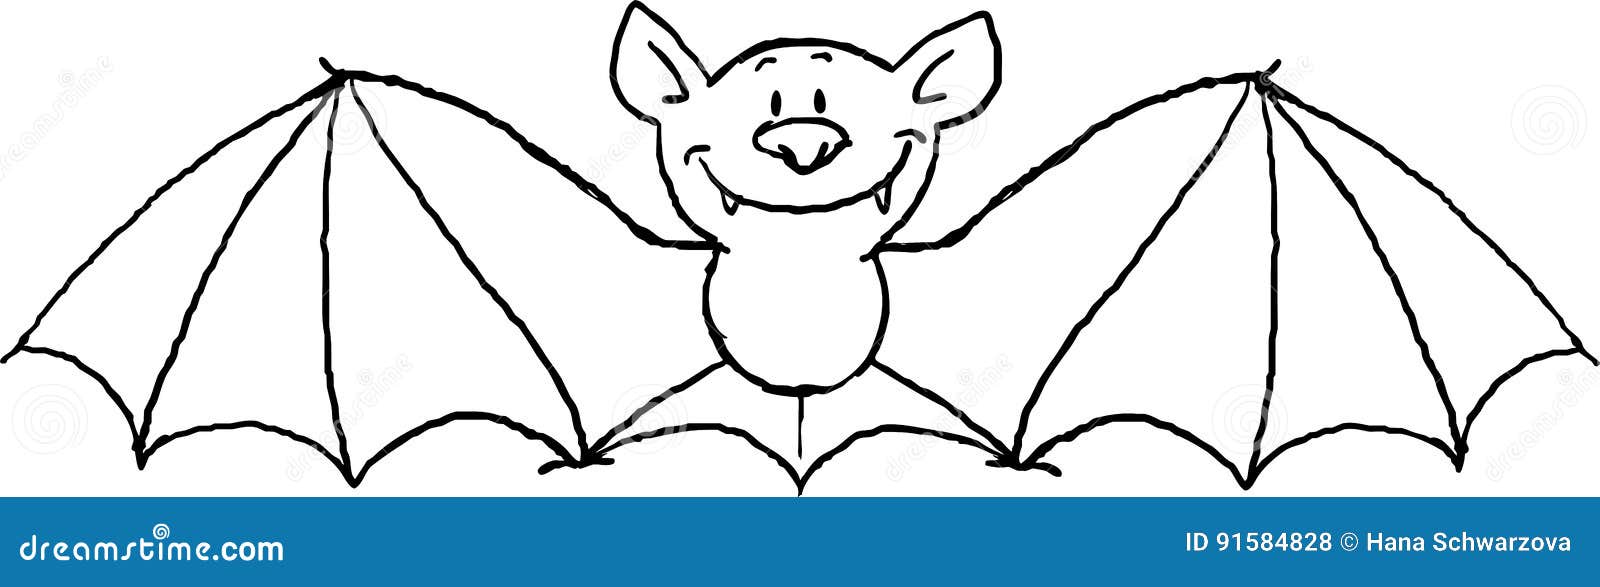 Flying Bat Cartoon Isolated on White - Black and White Vector Stock Vector  - Illustration of mouse, comic: 91584828